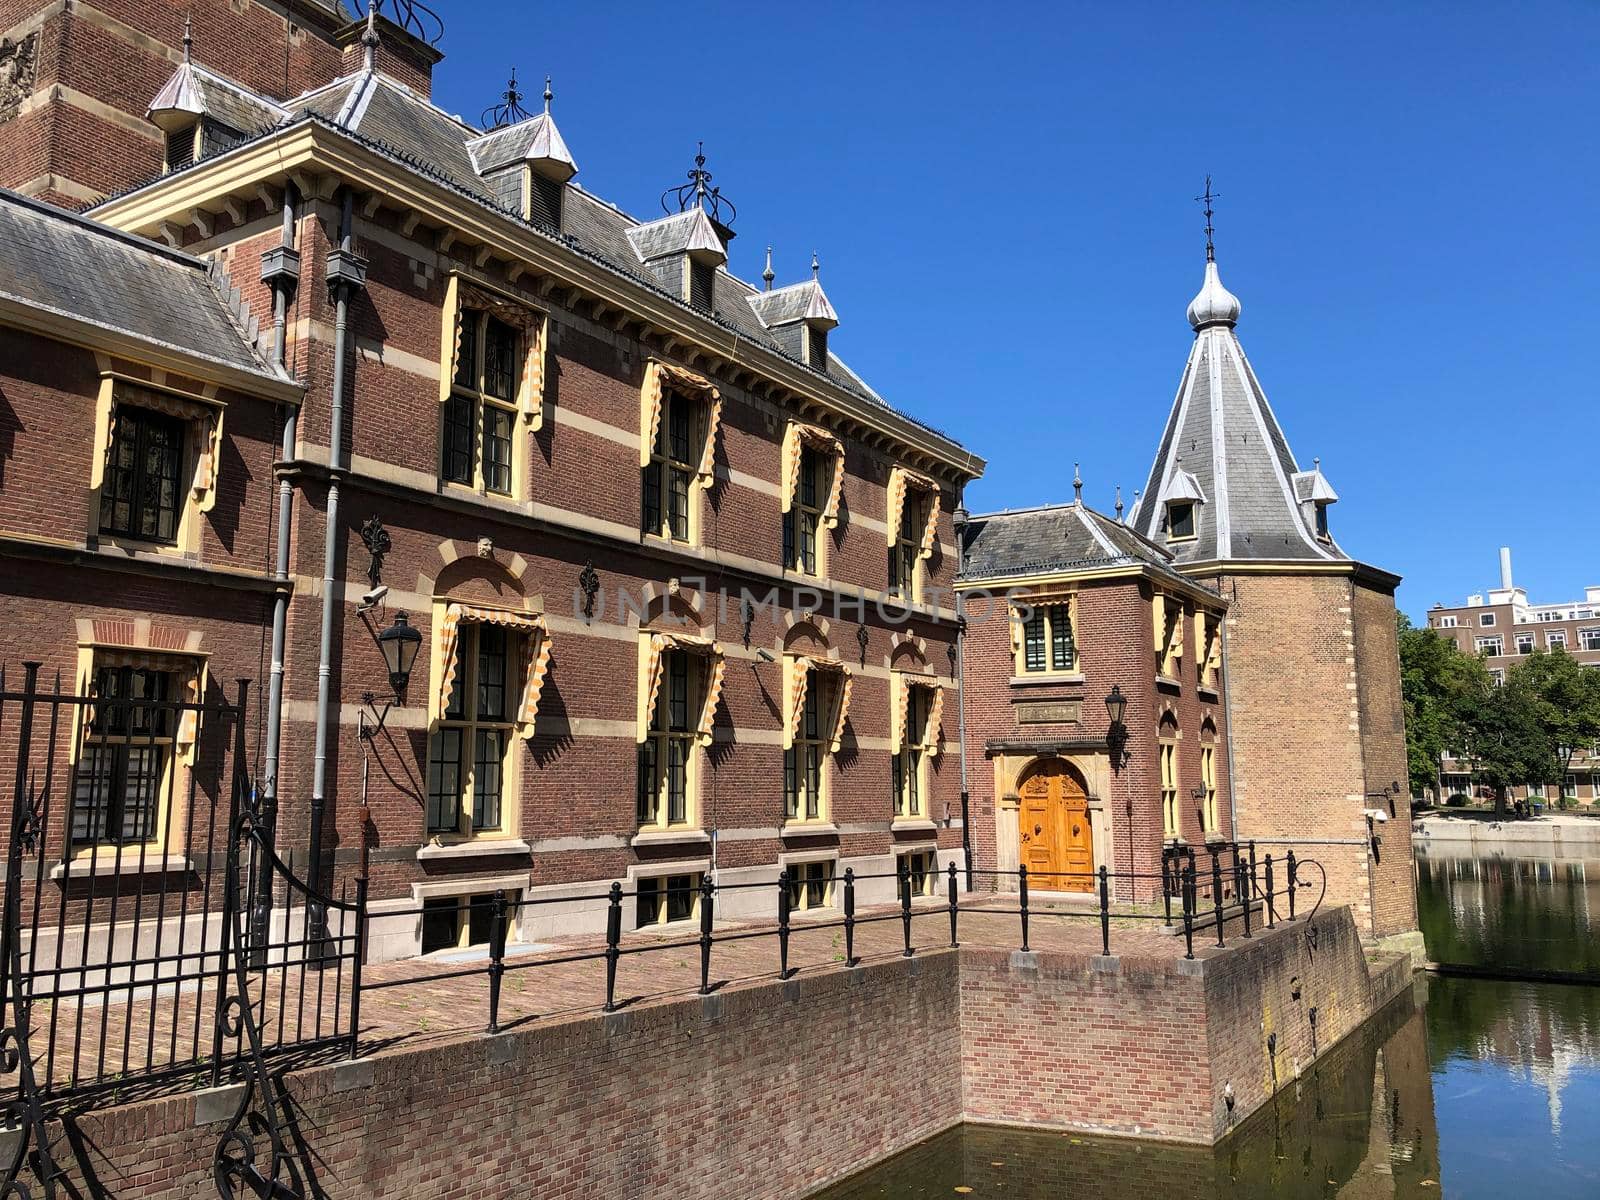 The Binnenhof and Hofvijver in The Hague by traveltelly